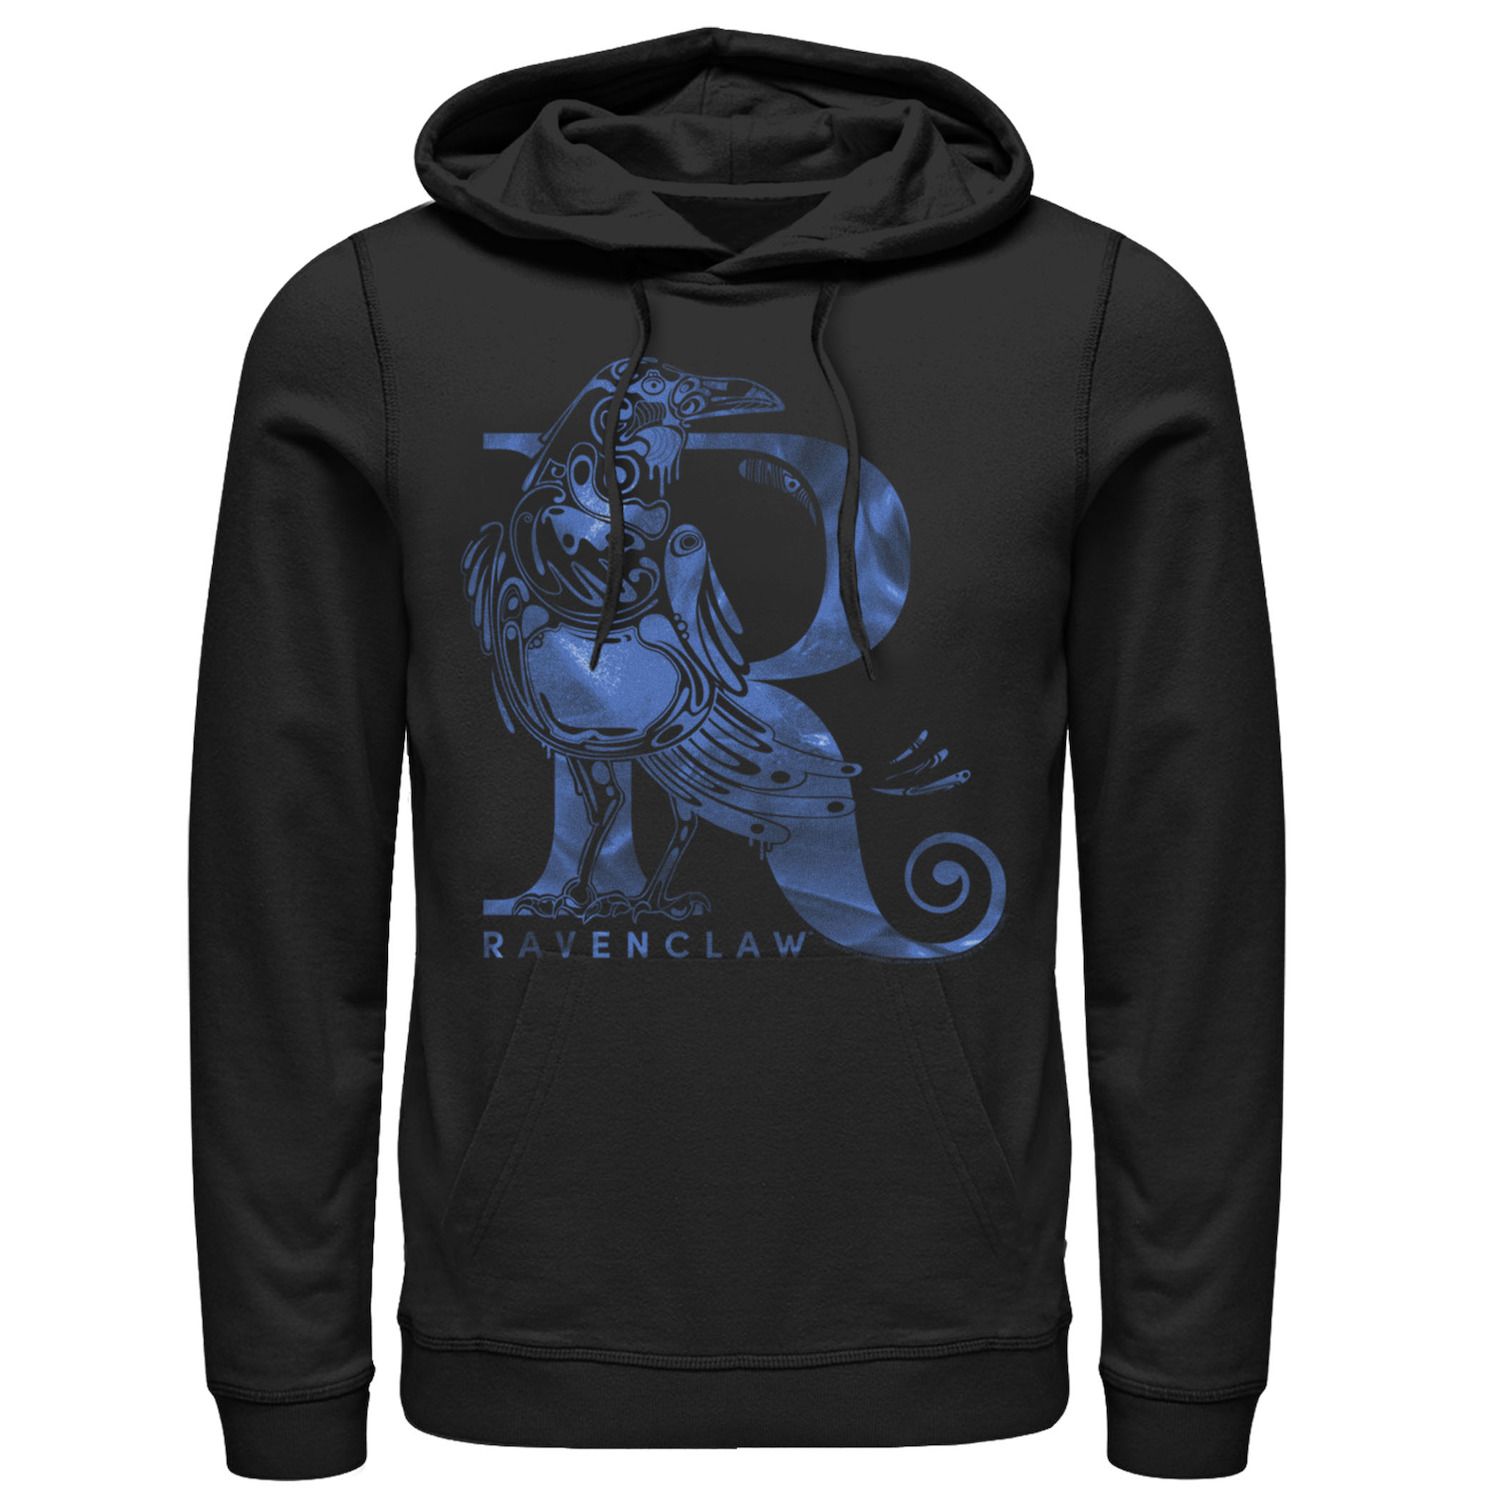 Image for Harry Potter Men's Ravenclaw Pullover Hoodie at Kohl's.